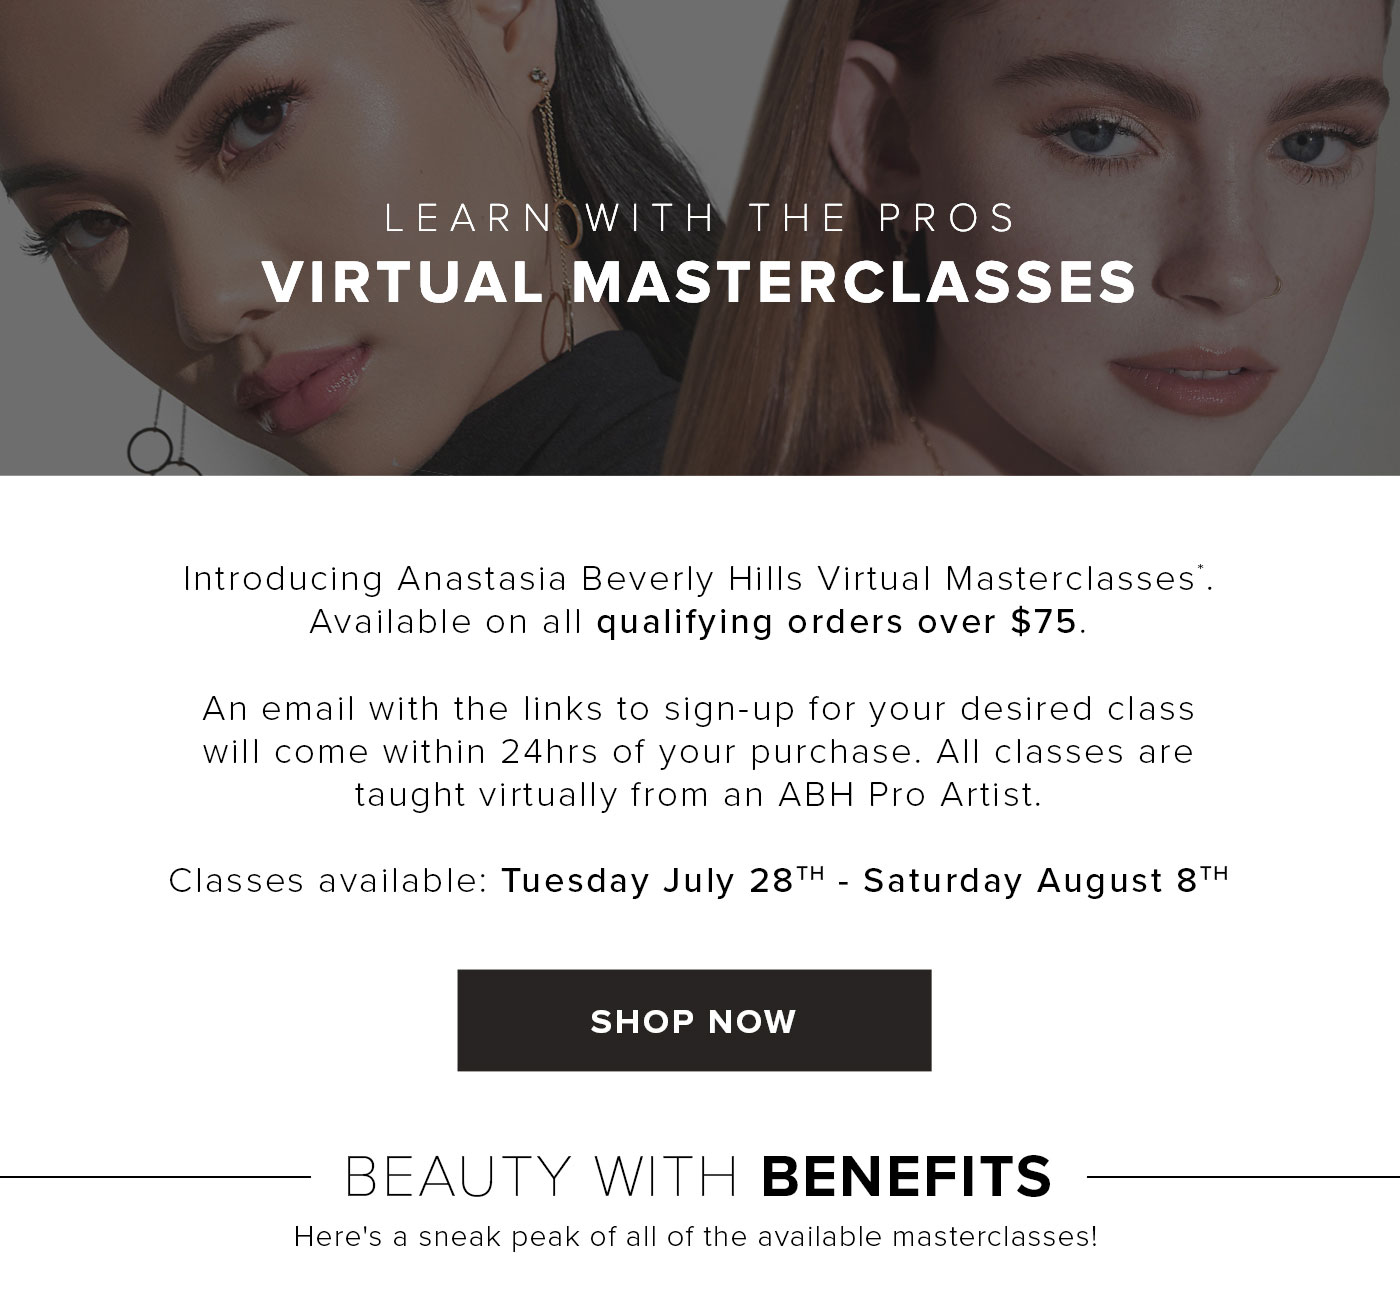 Learn with the Pros - Virtual Masterclasses